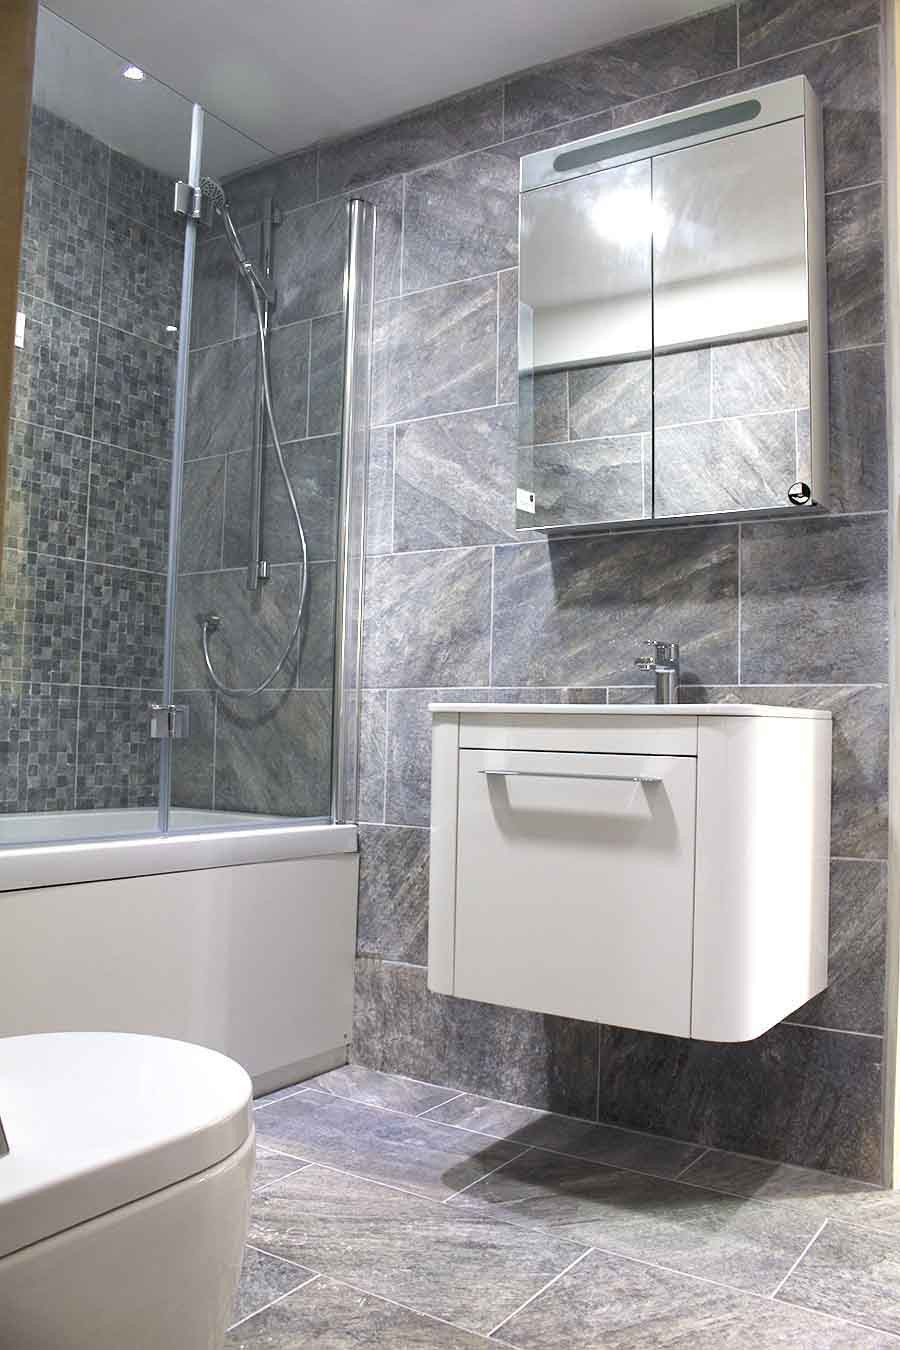 Images Of Bathroom Tile
 Ideas & Tips for Creating Stylish Over Bath Showers